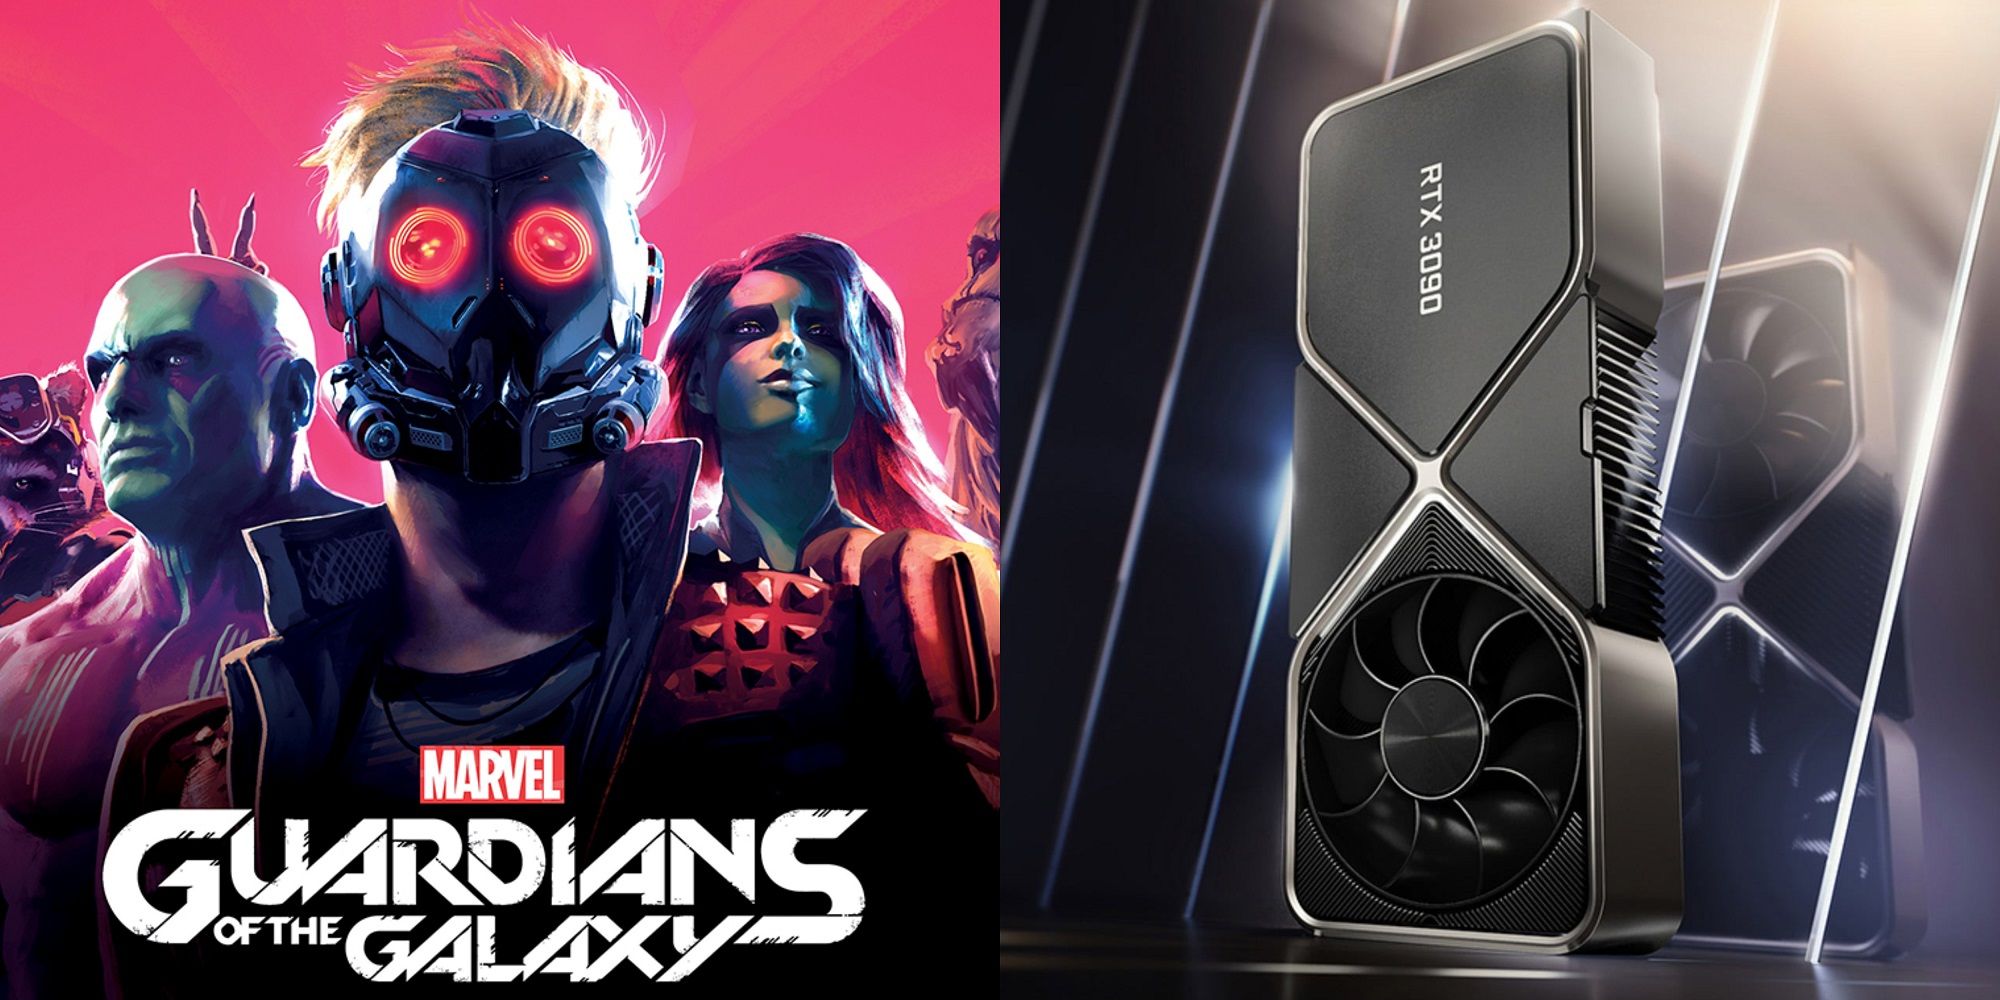 You Can Now Get Guardians Of The Galaxy Free With Every GeForce RTX 3090